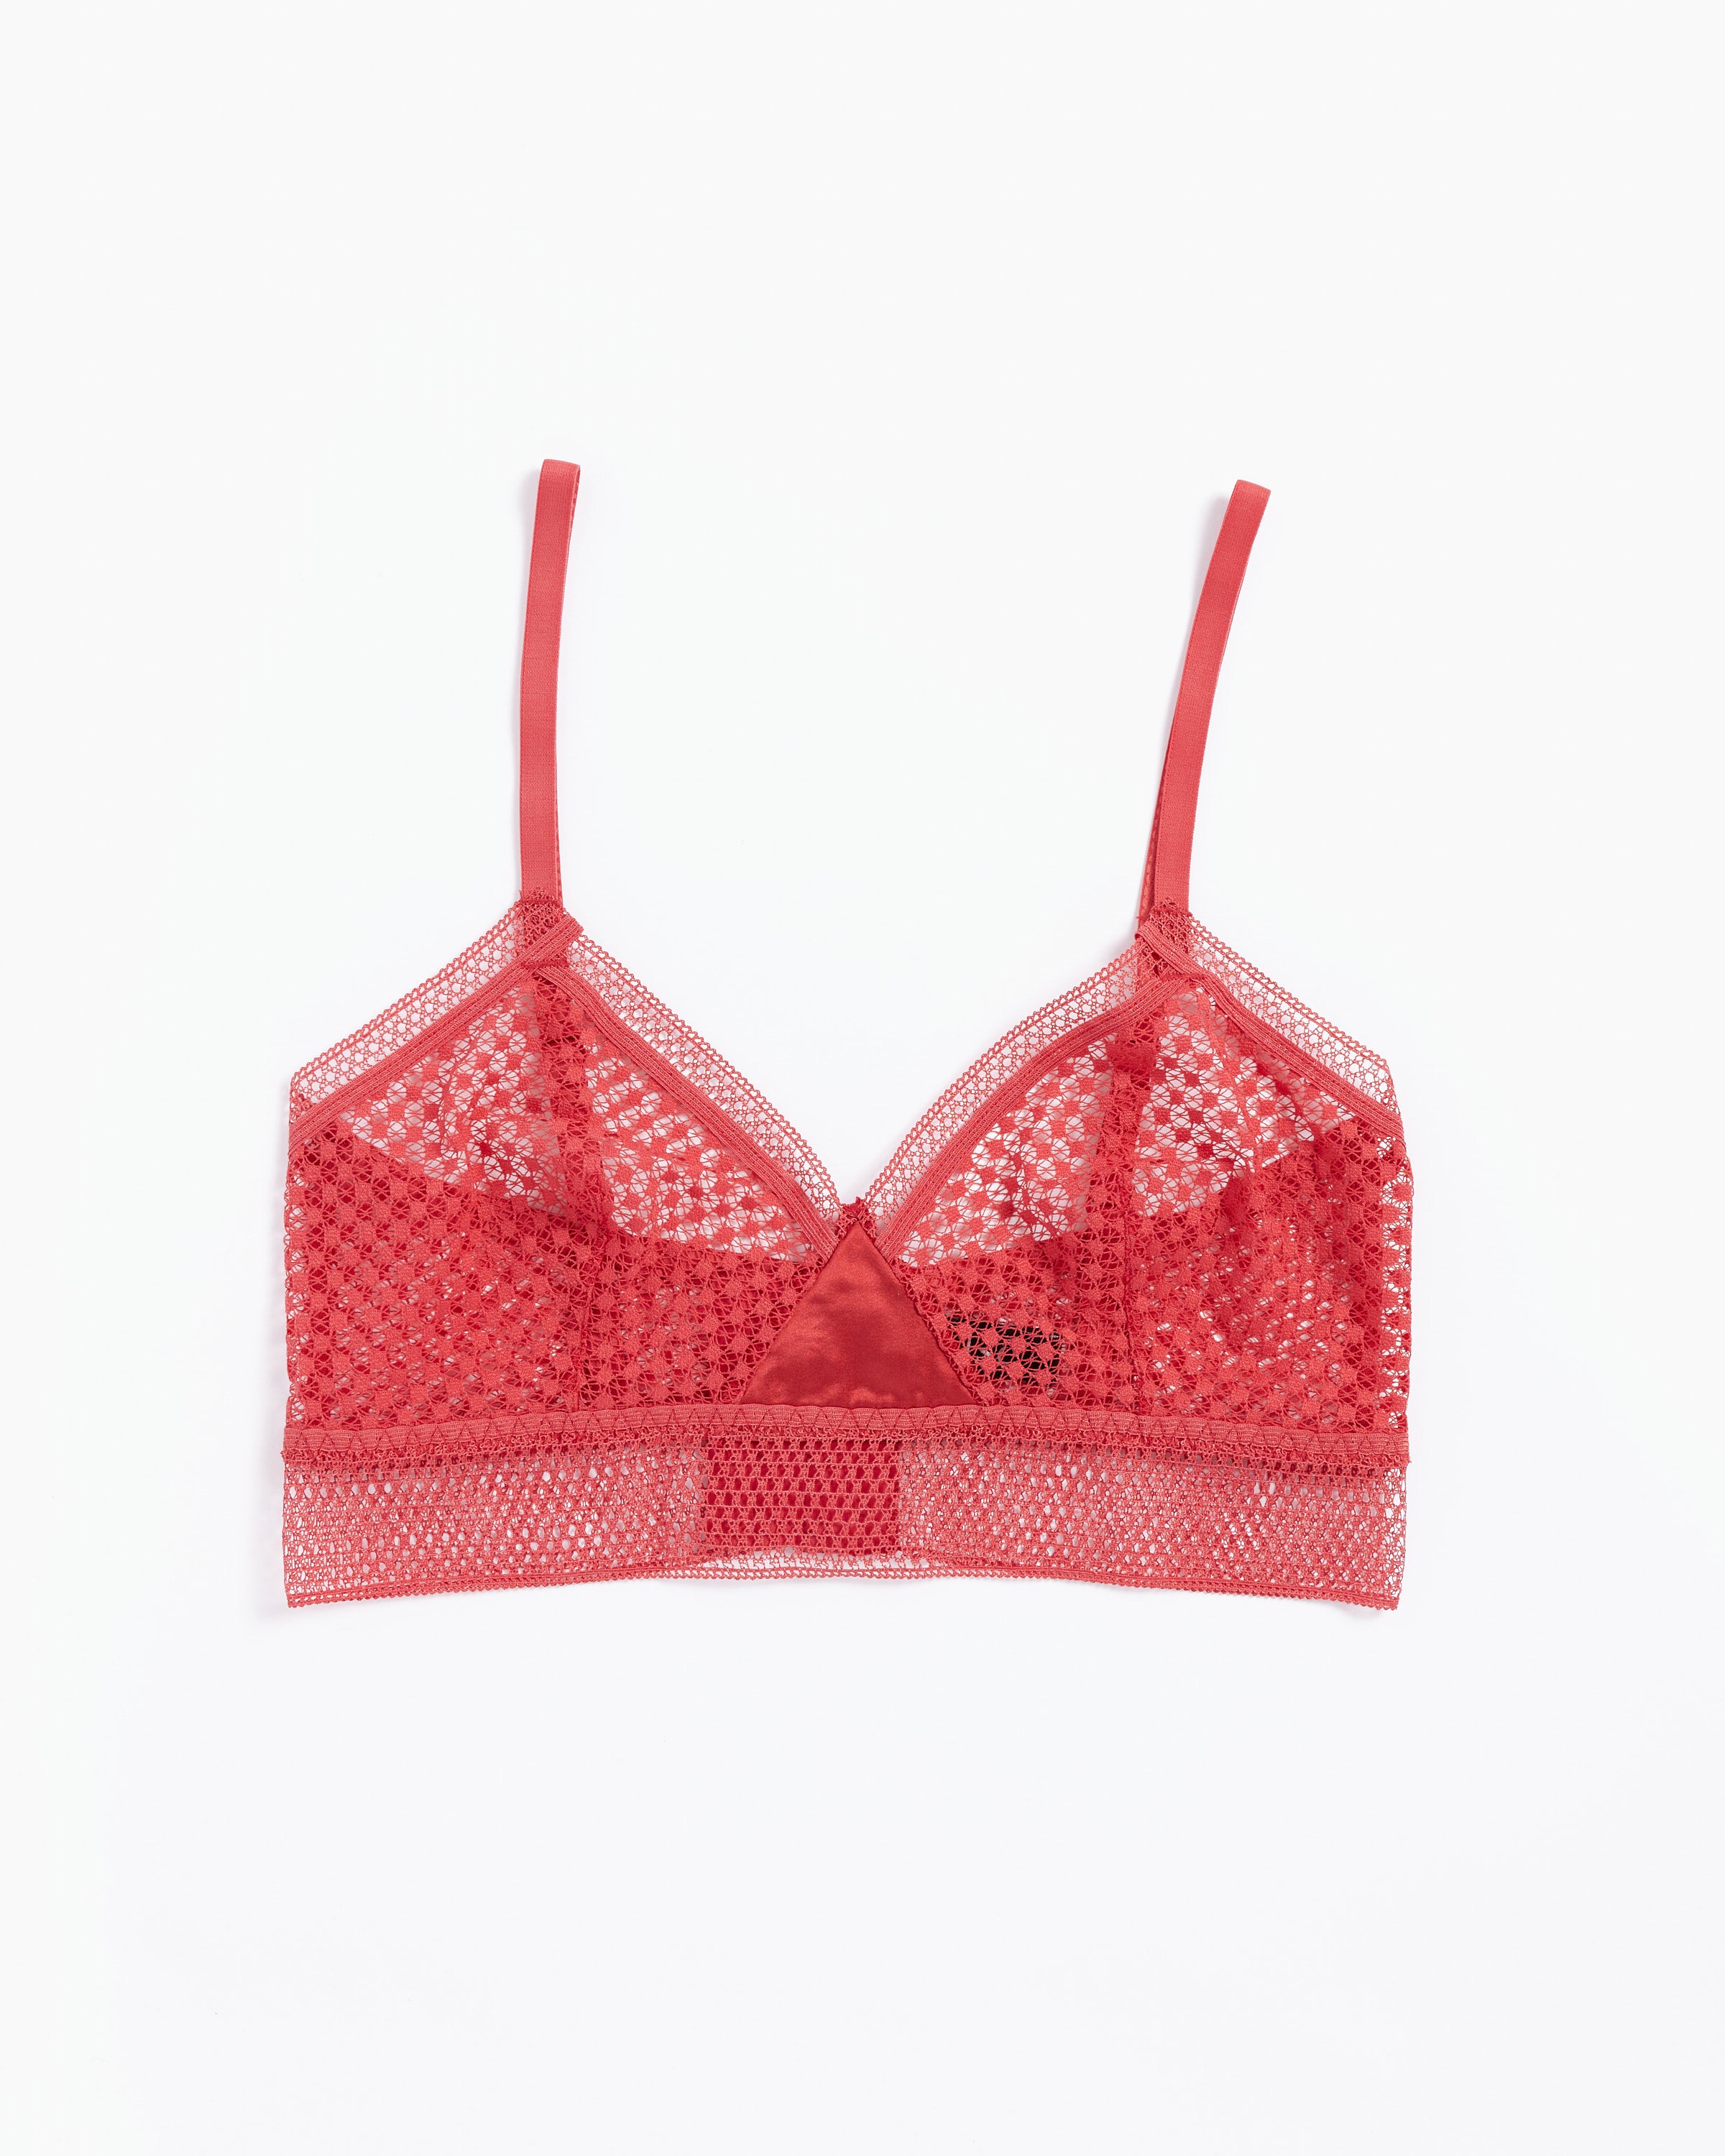 Red Fuchsia Lace Bralette - Extra Small, XS Sheer Triangle Bra